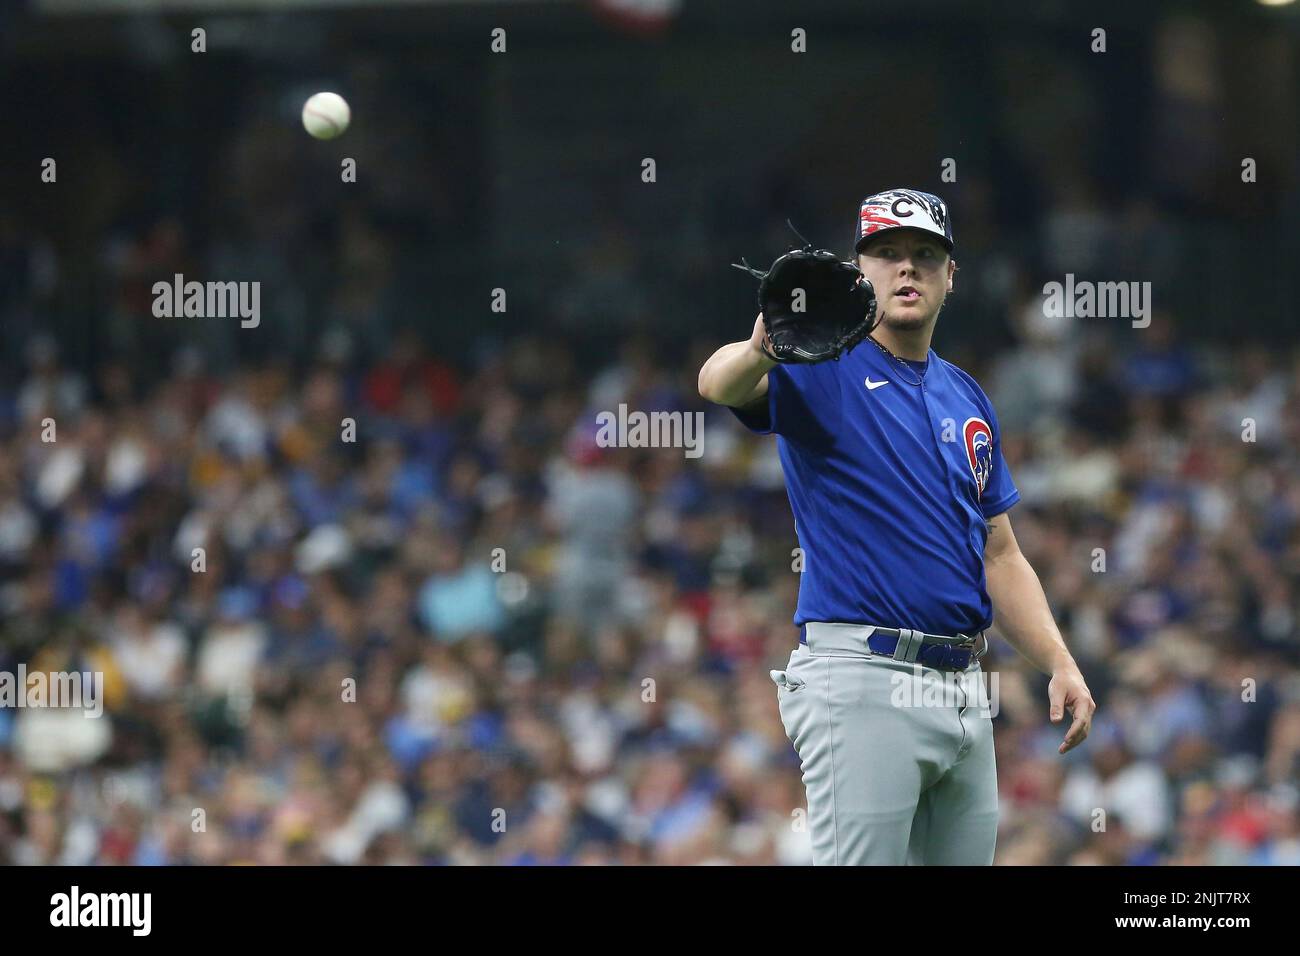 MILWAUKEE, WI - JULY 04: Chicago Cubs starting pitcher Justin